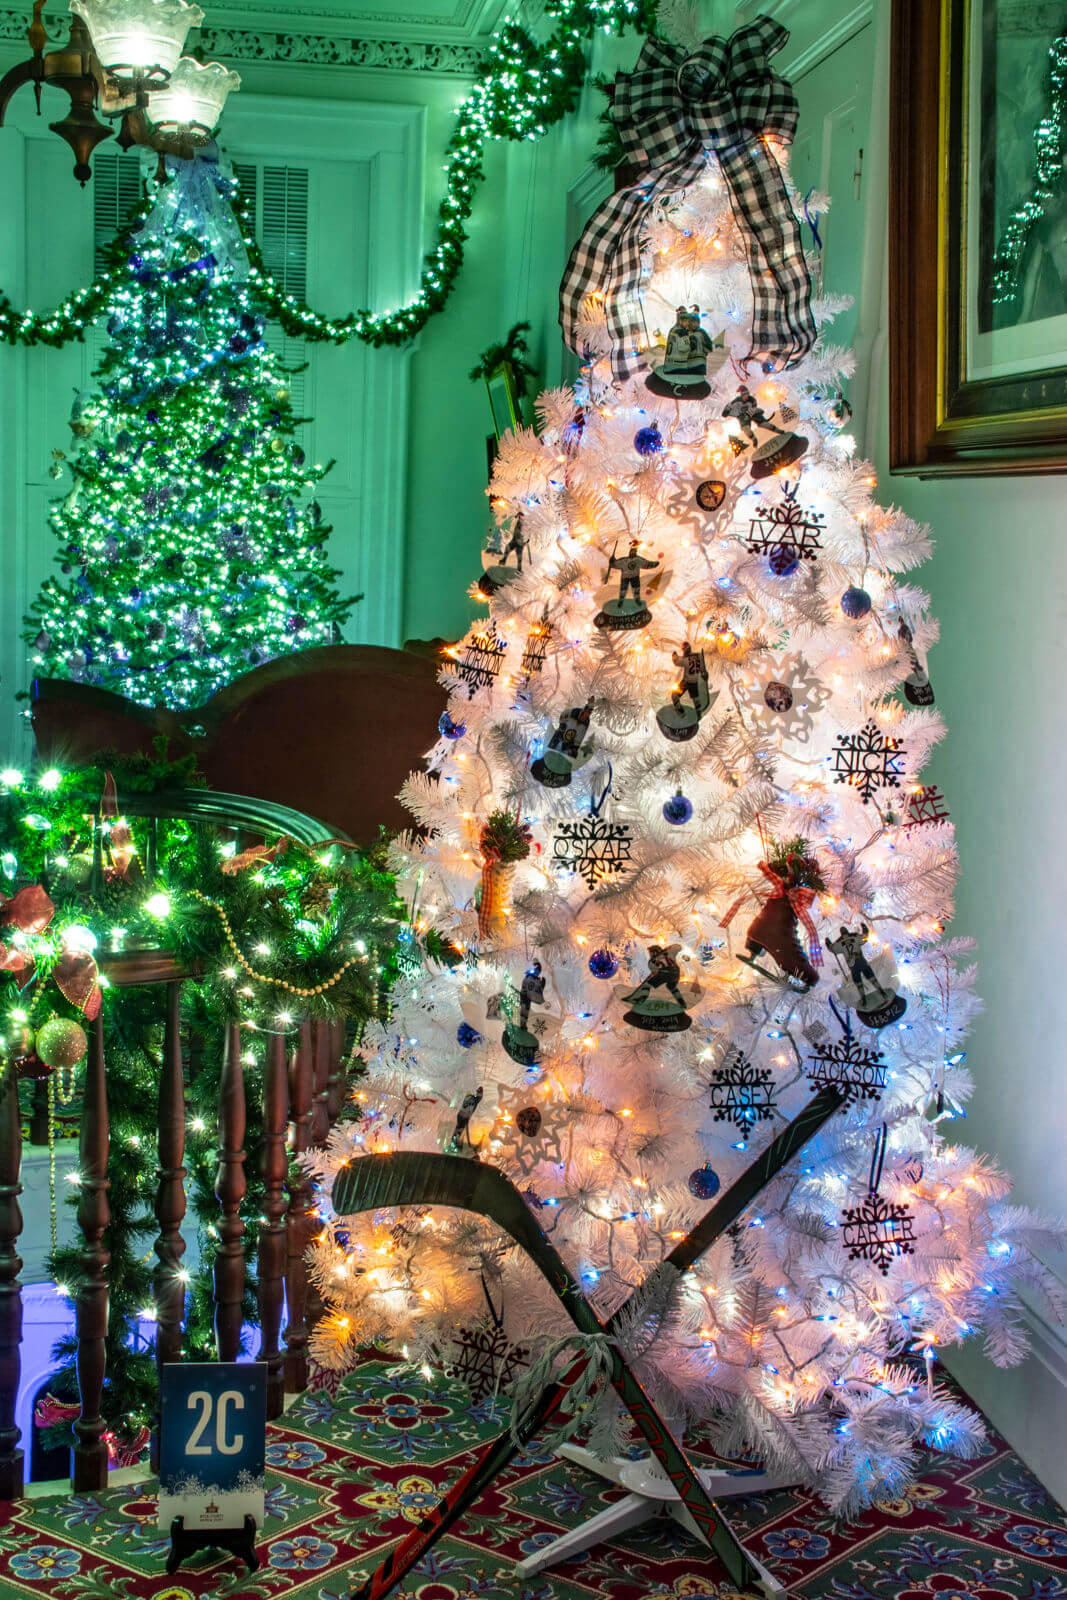 A finely decorated Christmas tree inside the Lincoln-Tallman House.